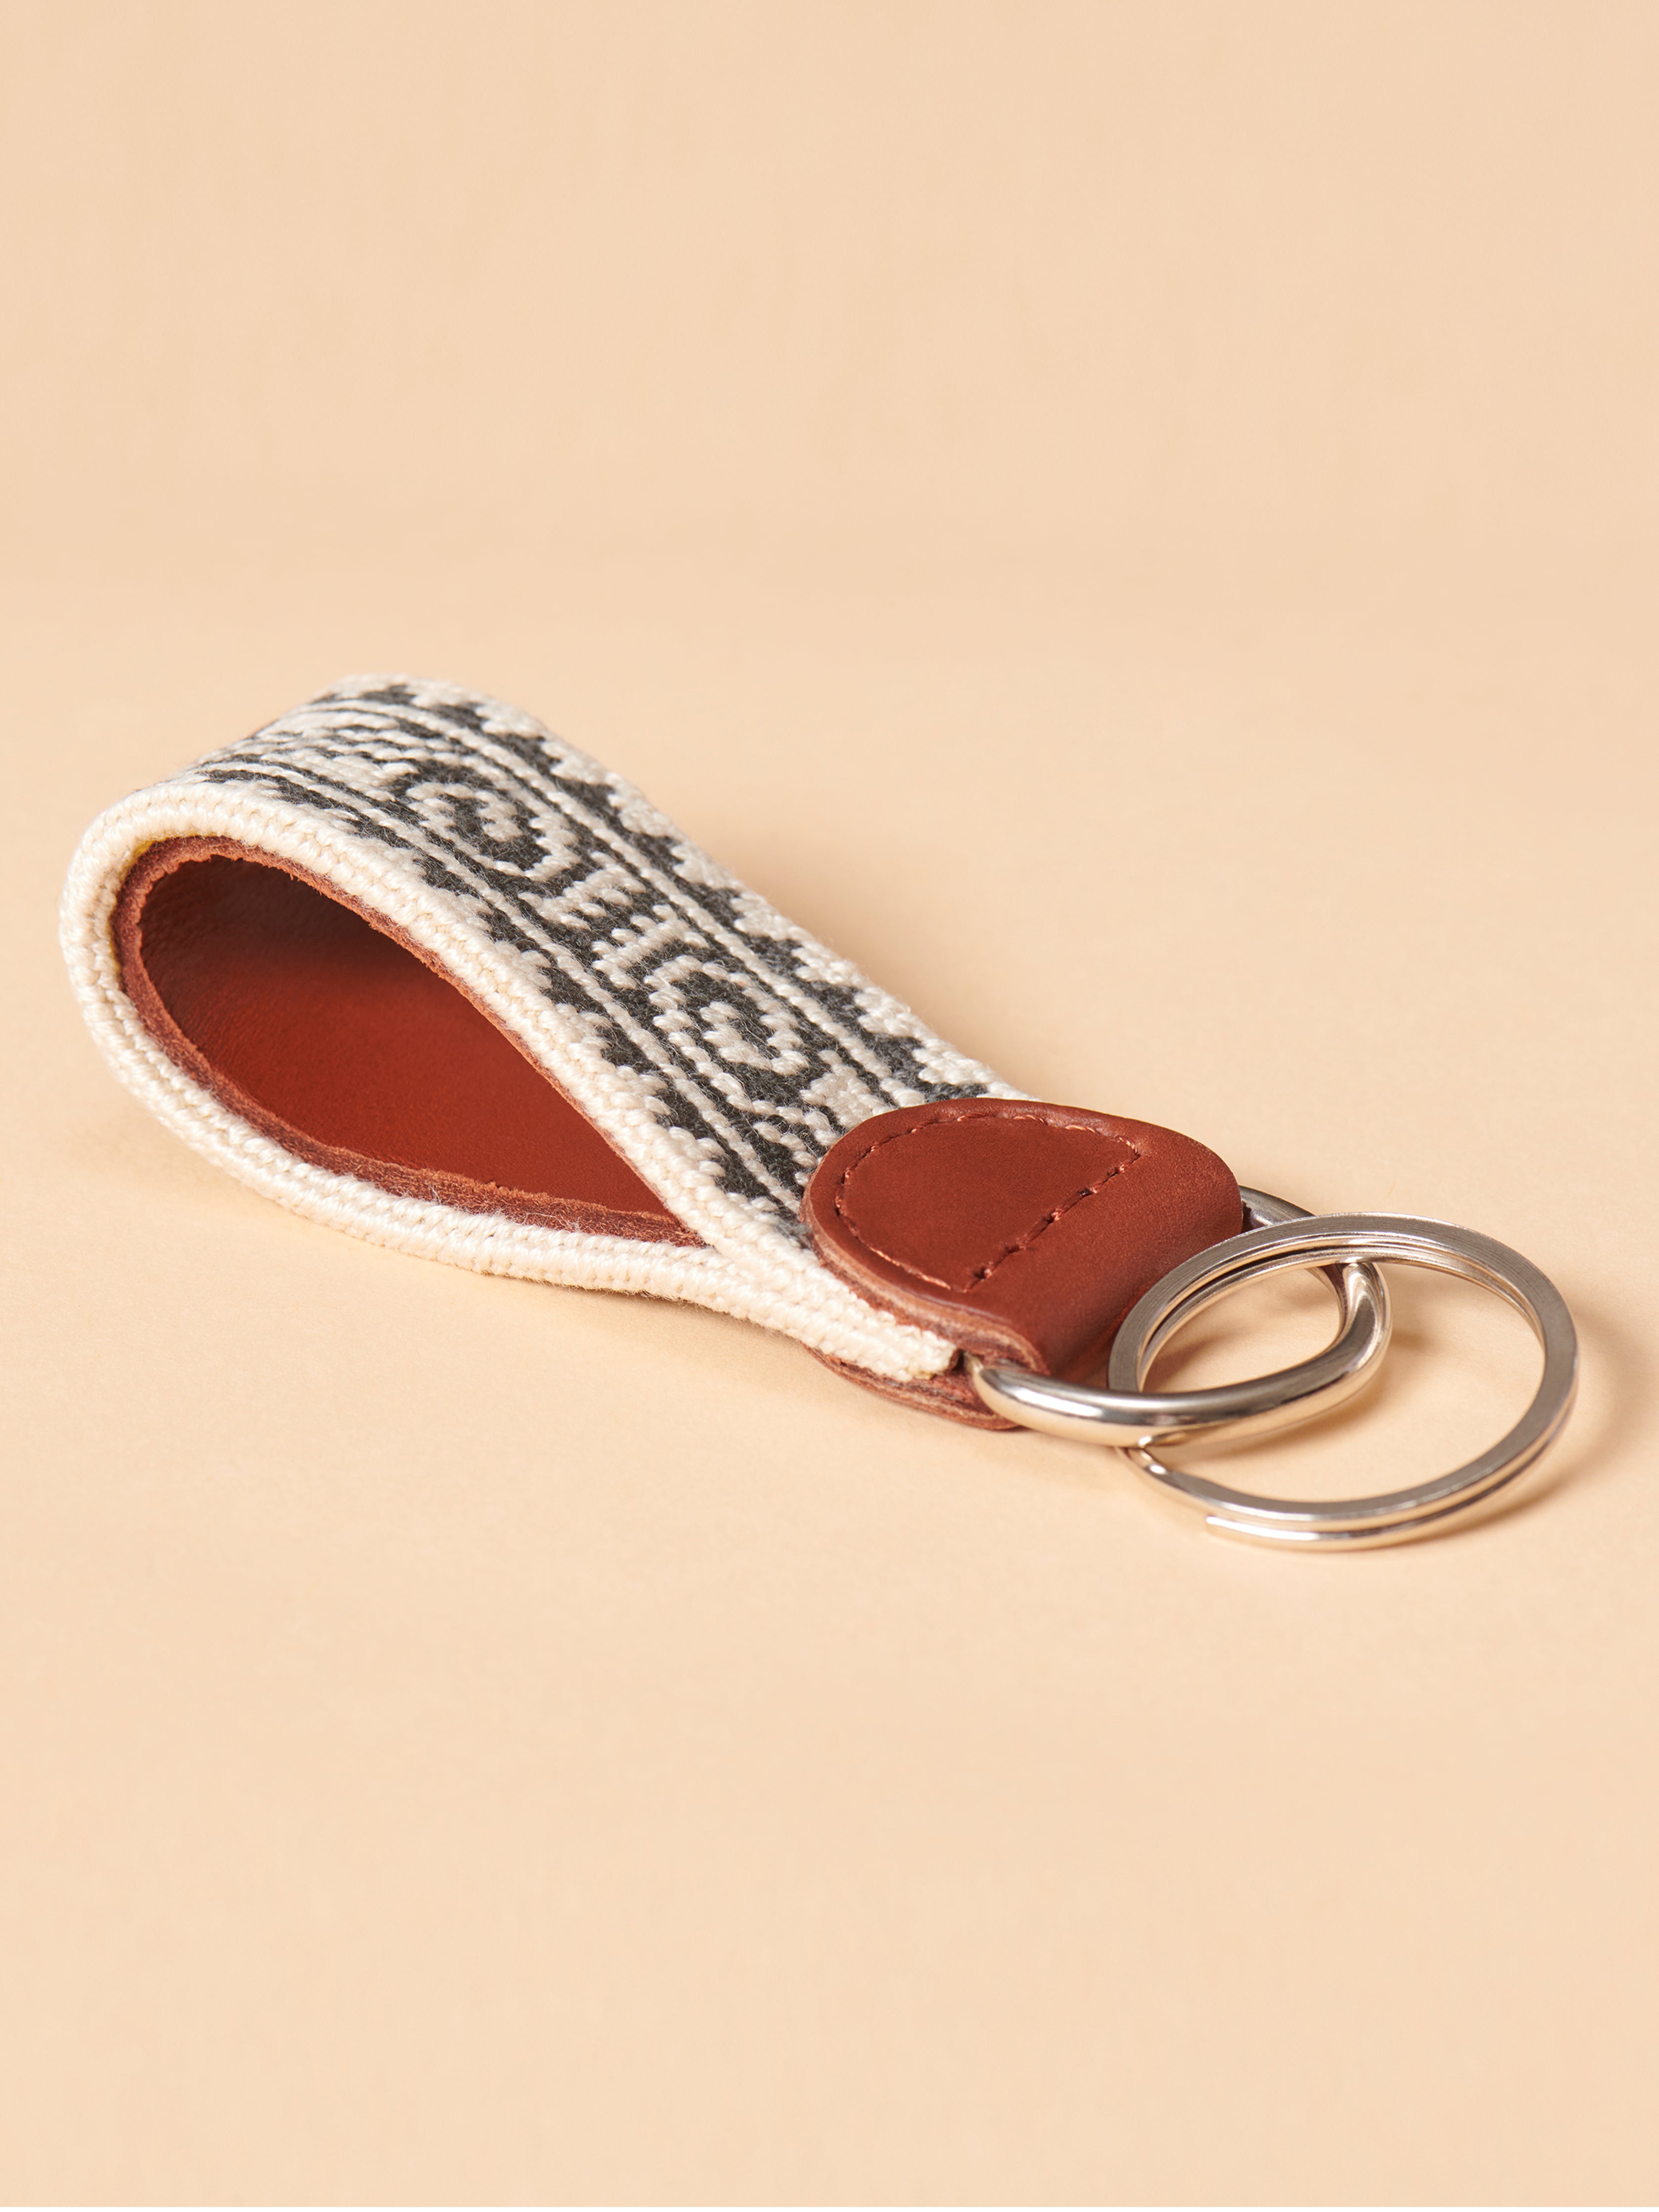 SPJ Key Fob - Charcoal Coiled Snake